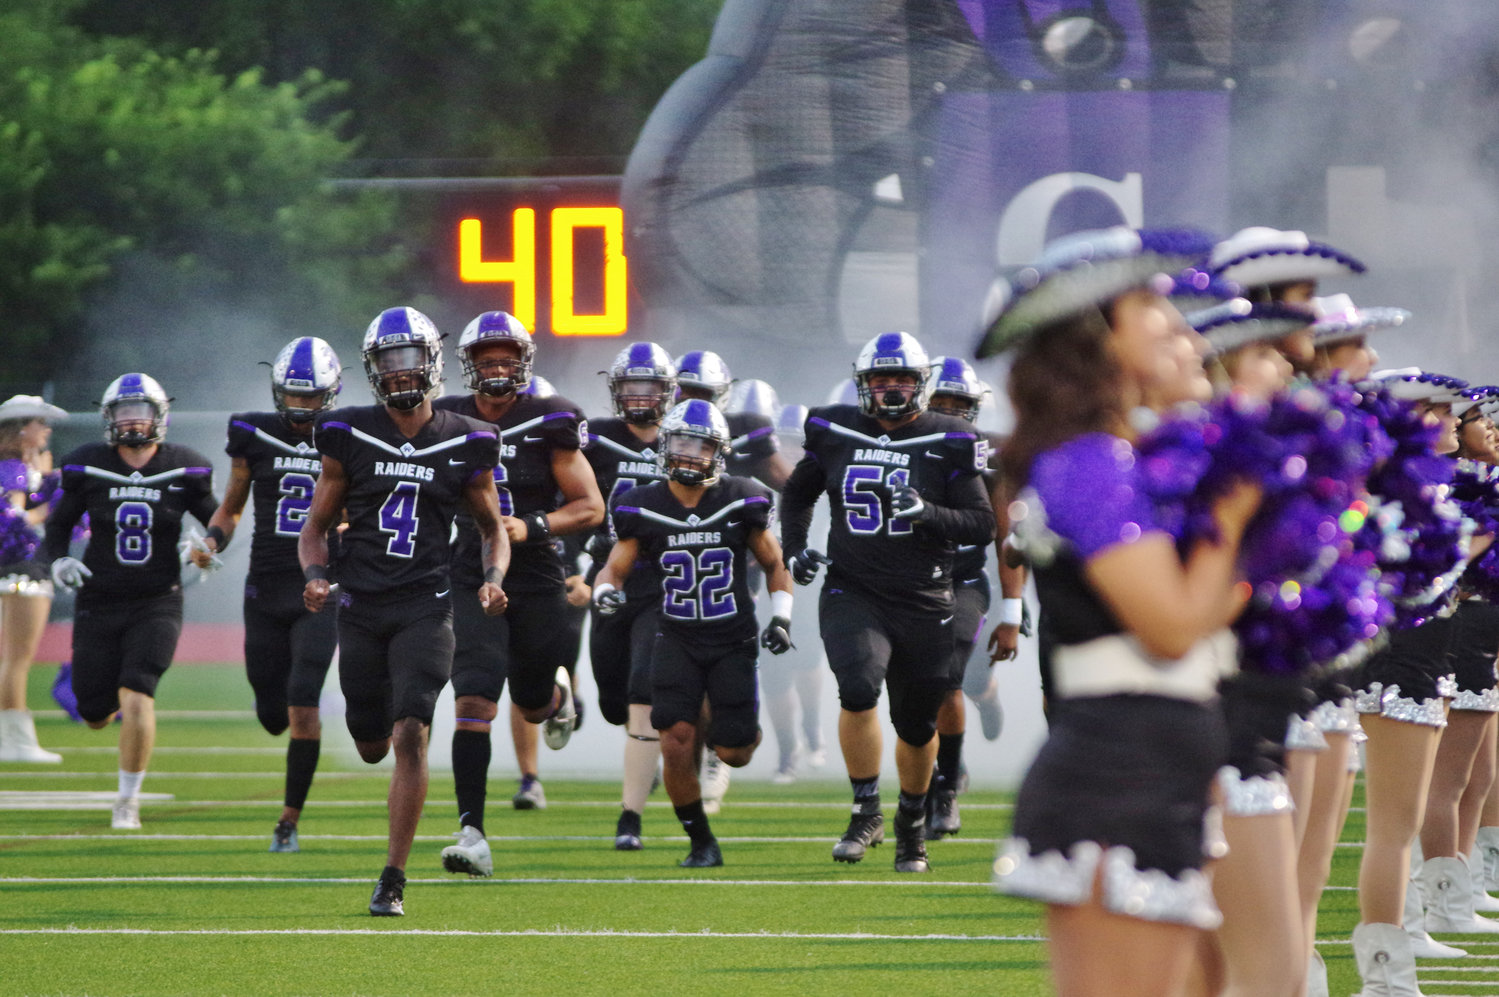 Experienced defense leading the charge as Cedar Ridge looks to continue